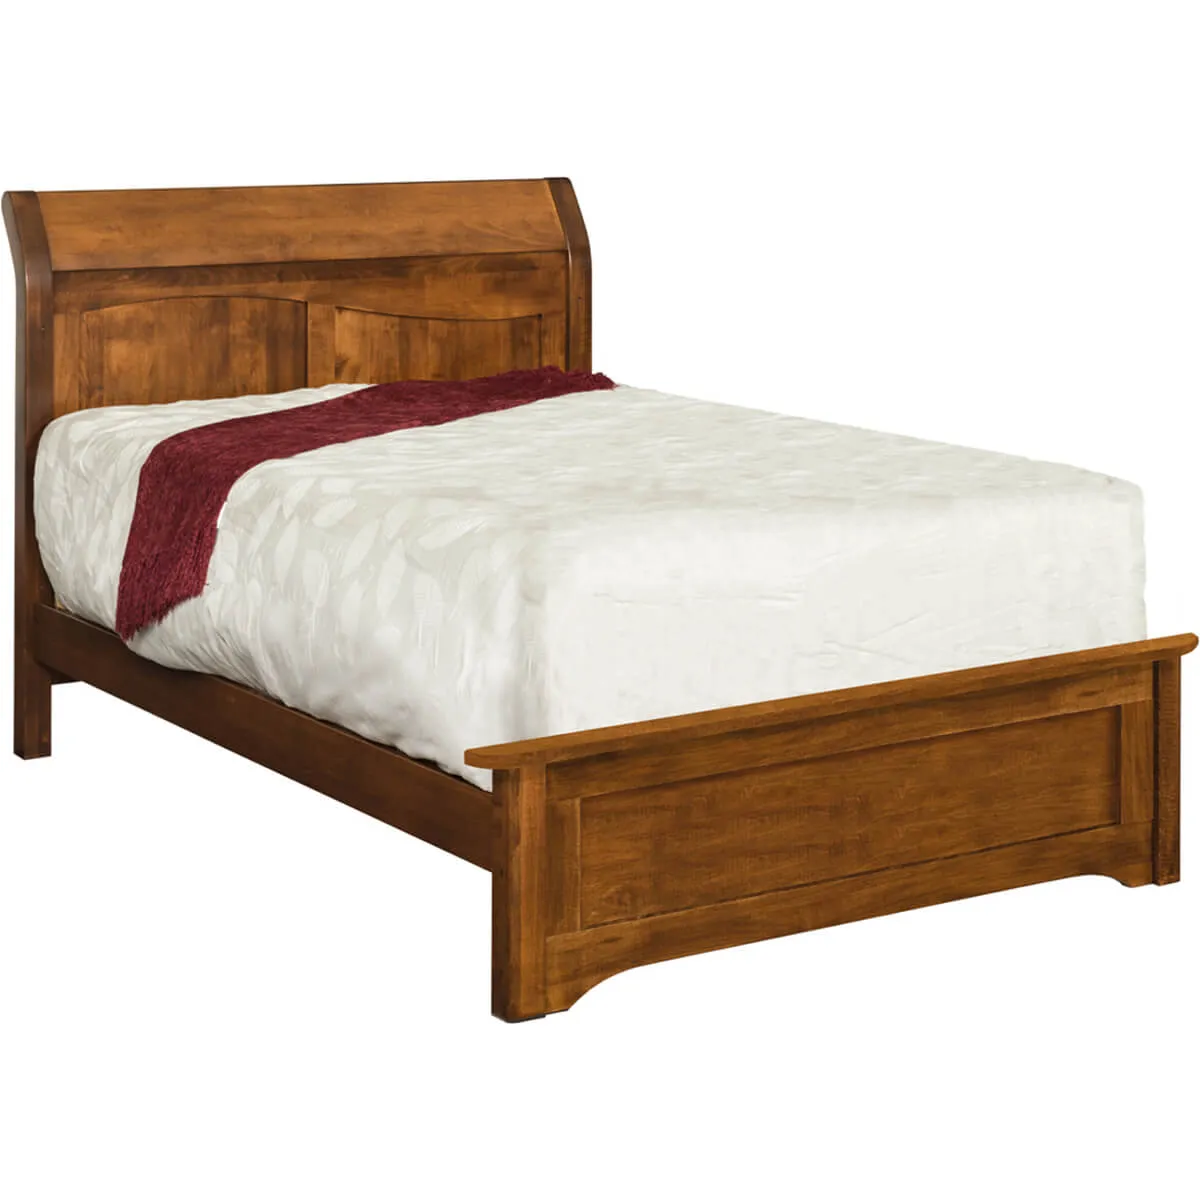 Tannessah Bed